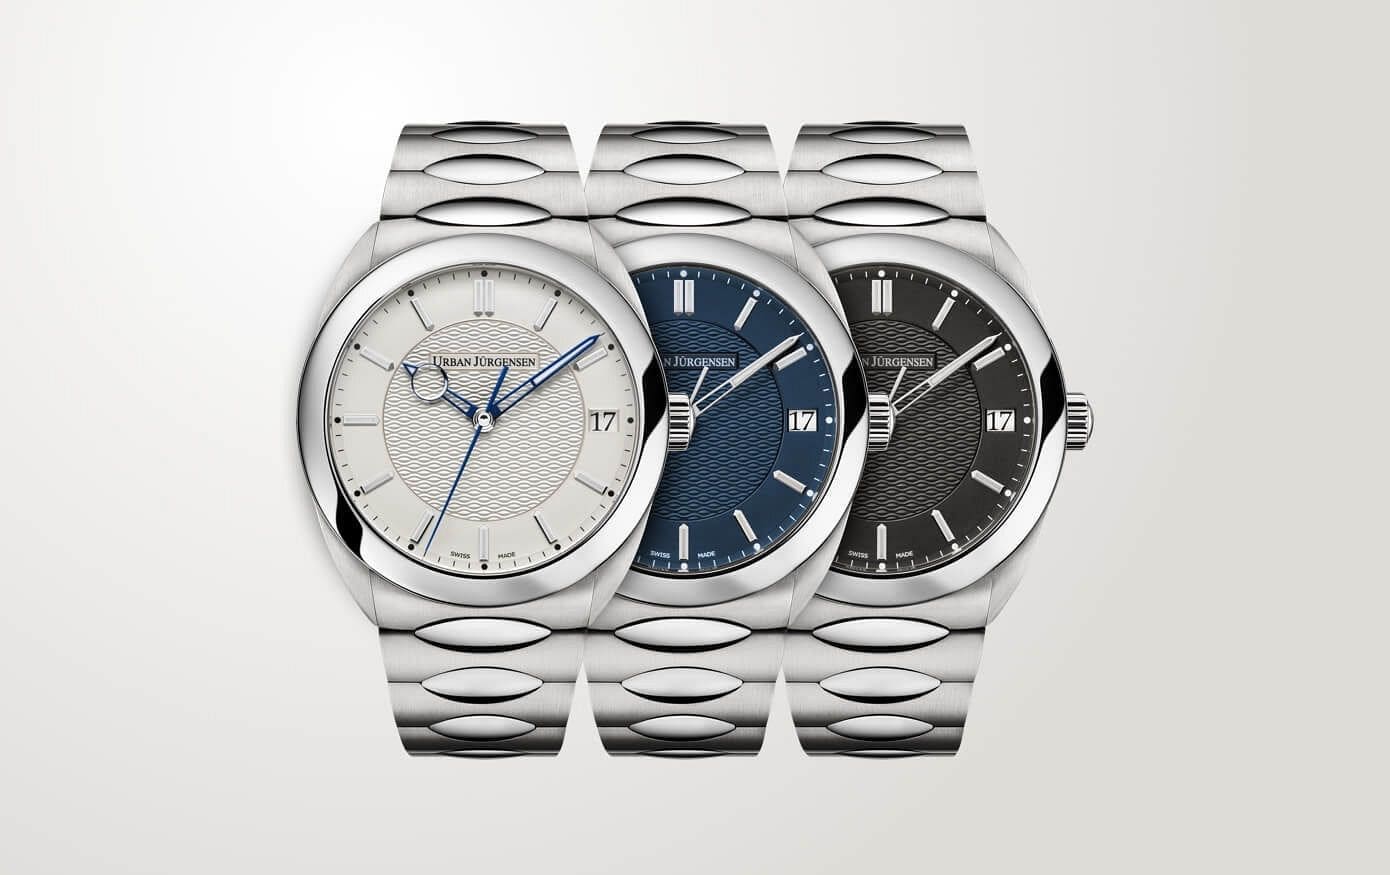 The Immortals – The Urban Jürgensen One is the integrated bracelet sports watch for those “in the know”